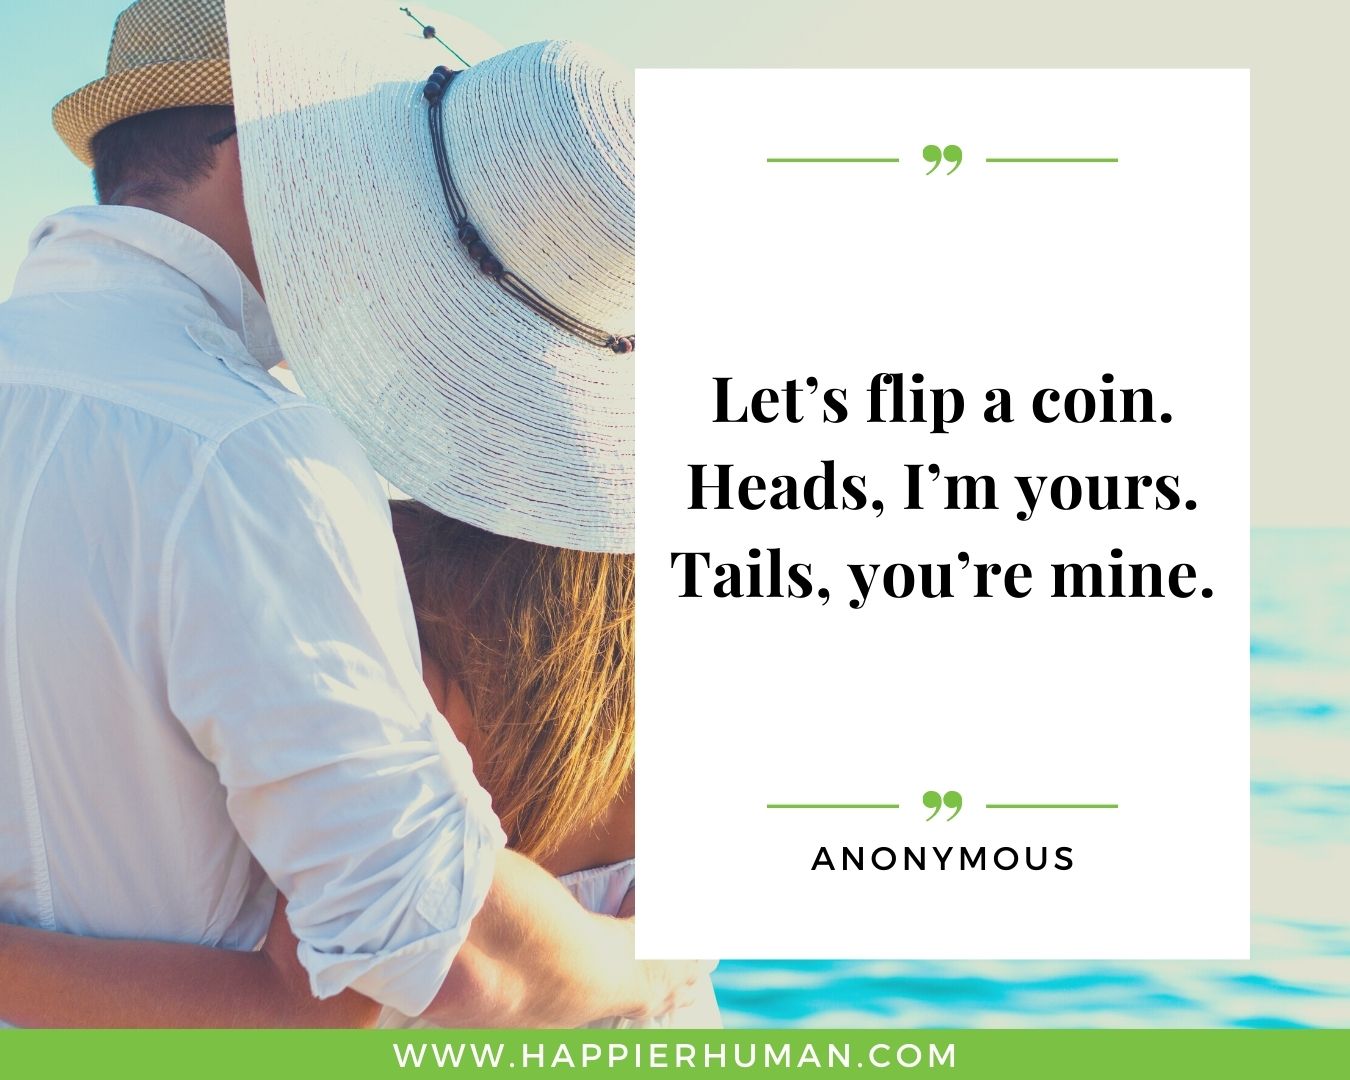 Simple love quotes- “Let’s flip a coin. Heads, I’m yours. Tails, you’re mine.” -Anonymous